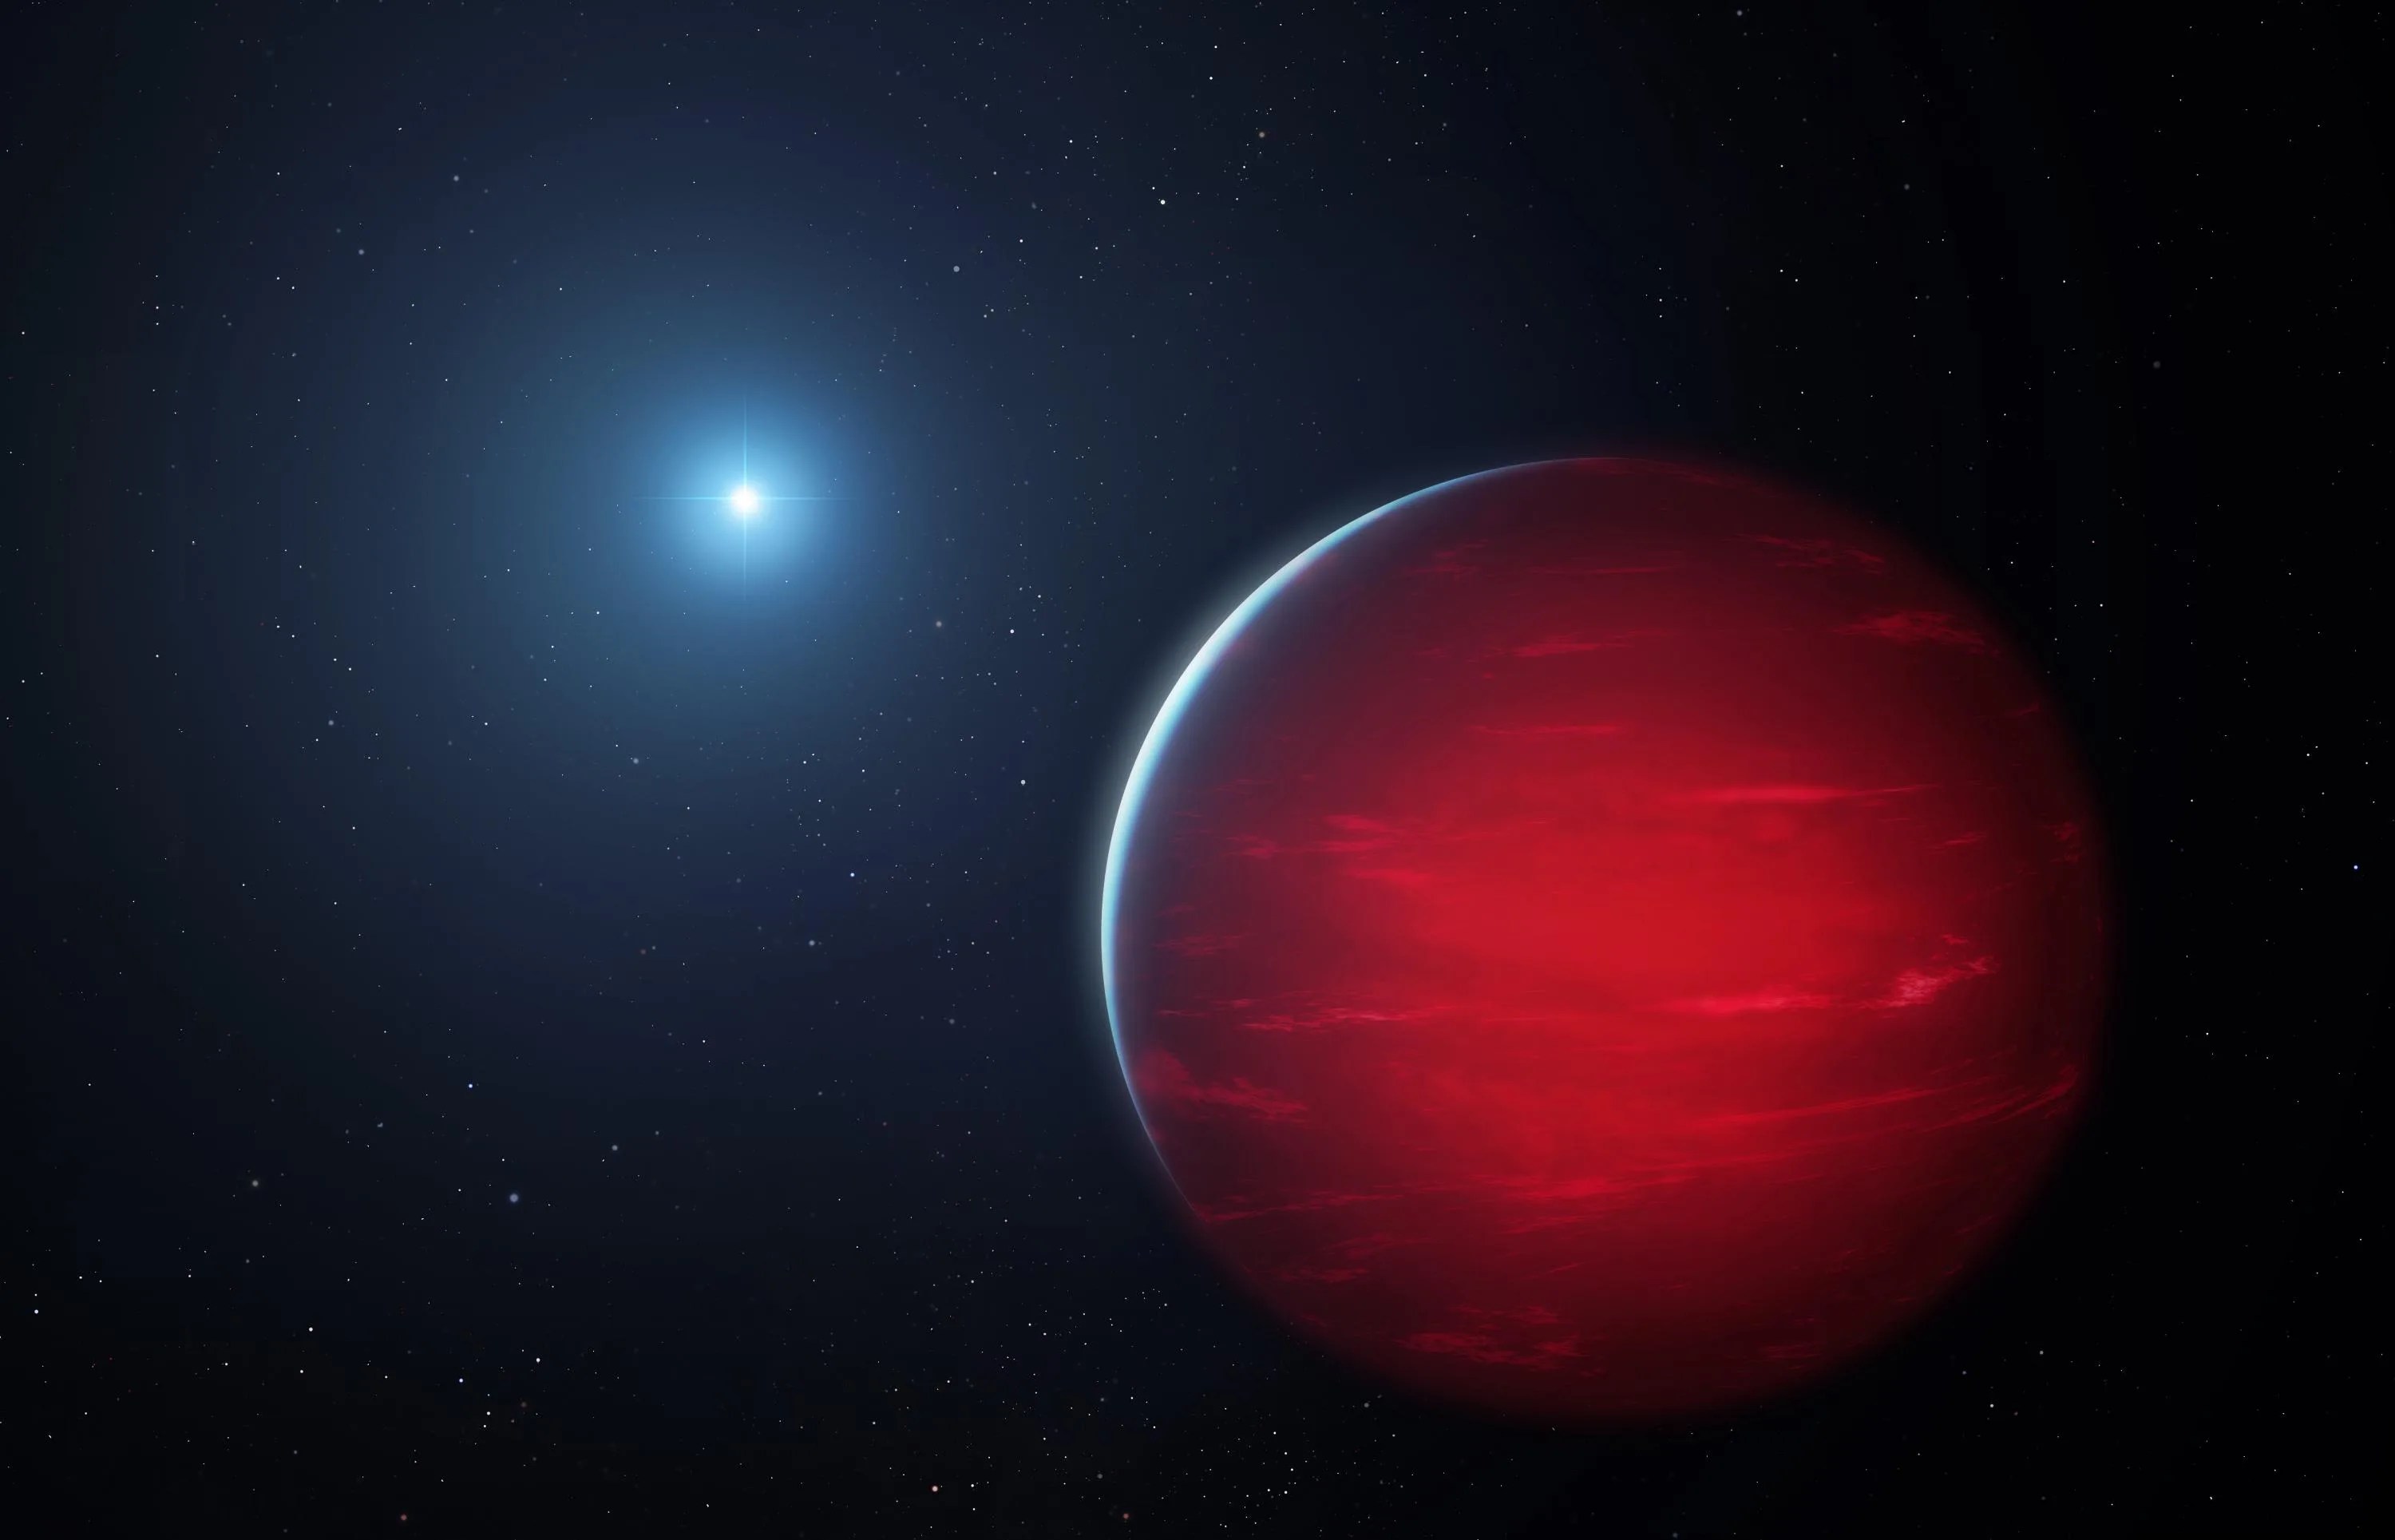 Illustration with black background and a larger red sphere in the foreground and a small white-blue glowing sphere in the distance.